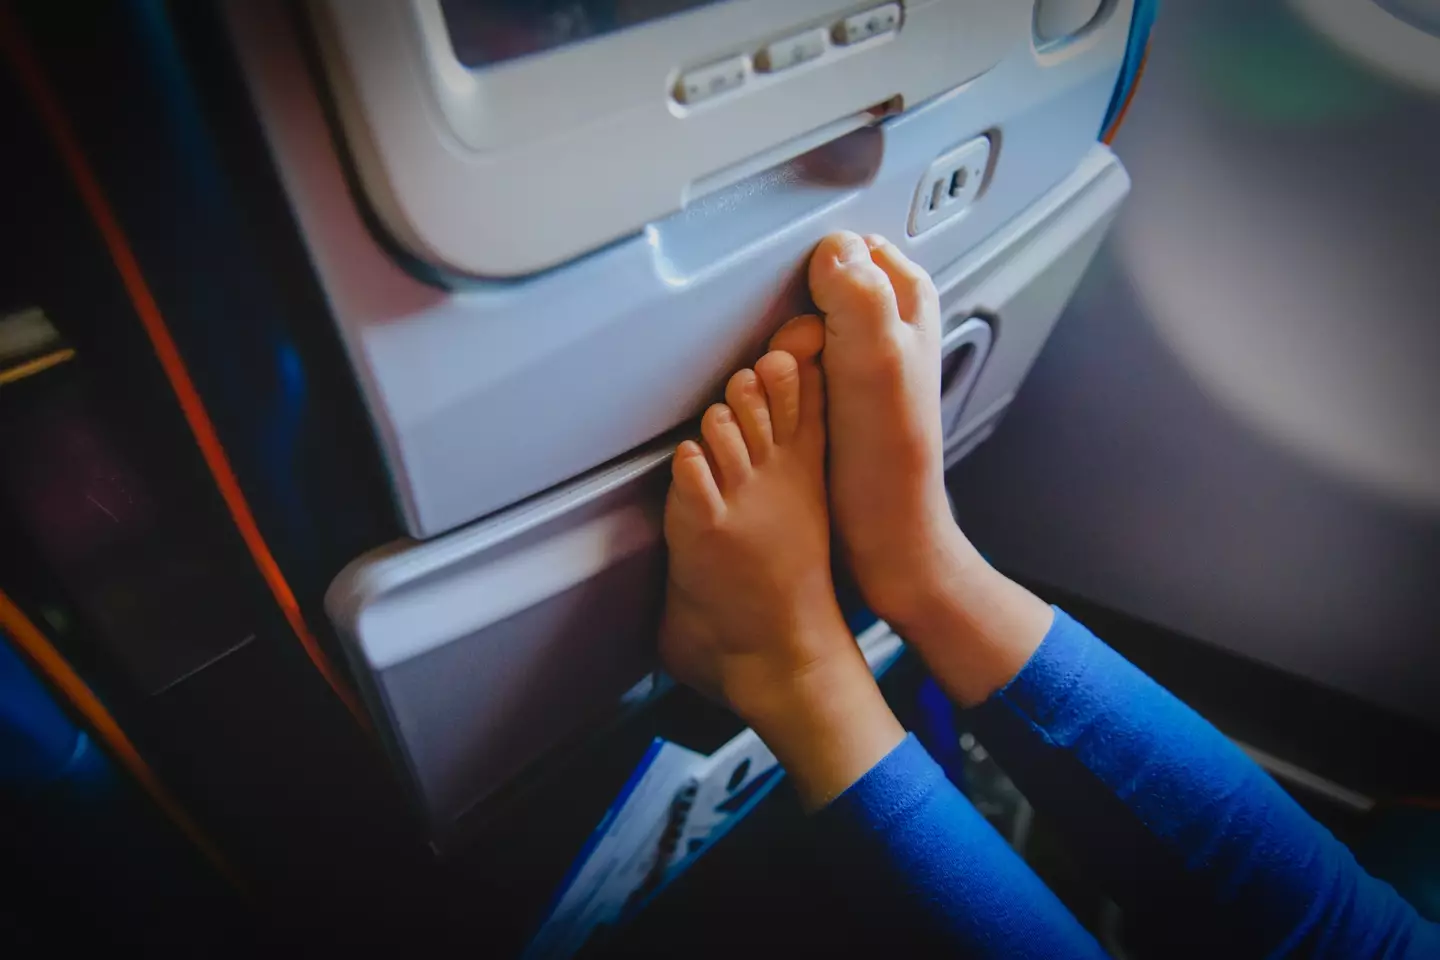 Some passengers stuck their feet in the space, while others found someone else's vomit.